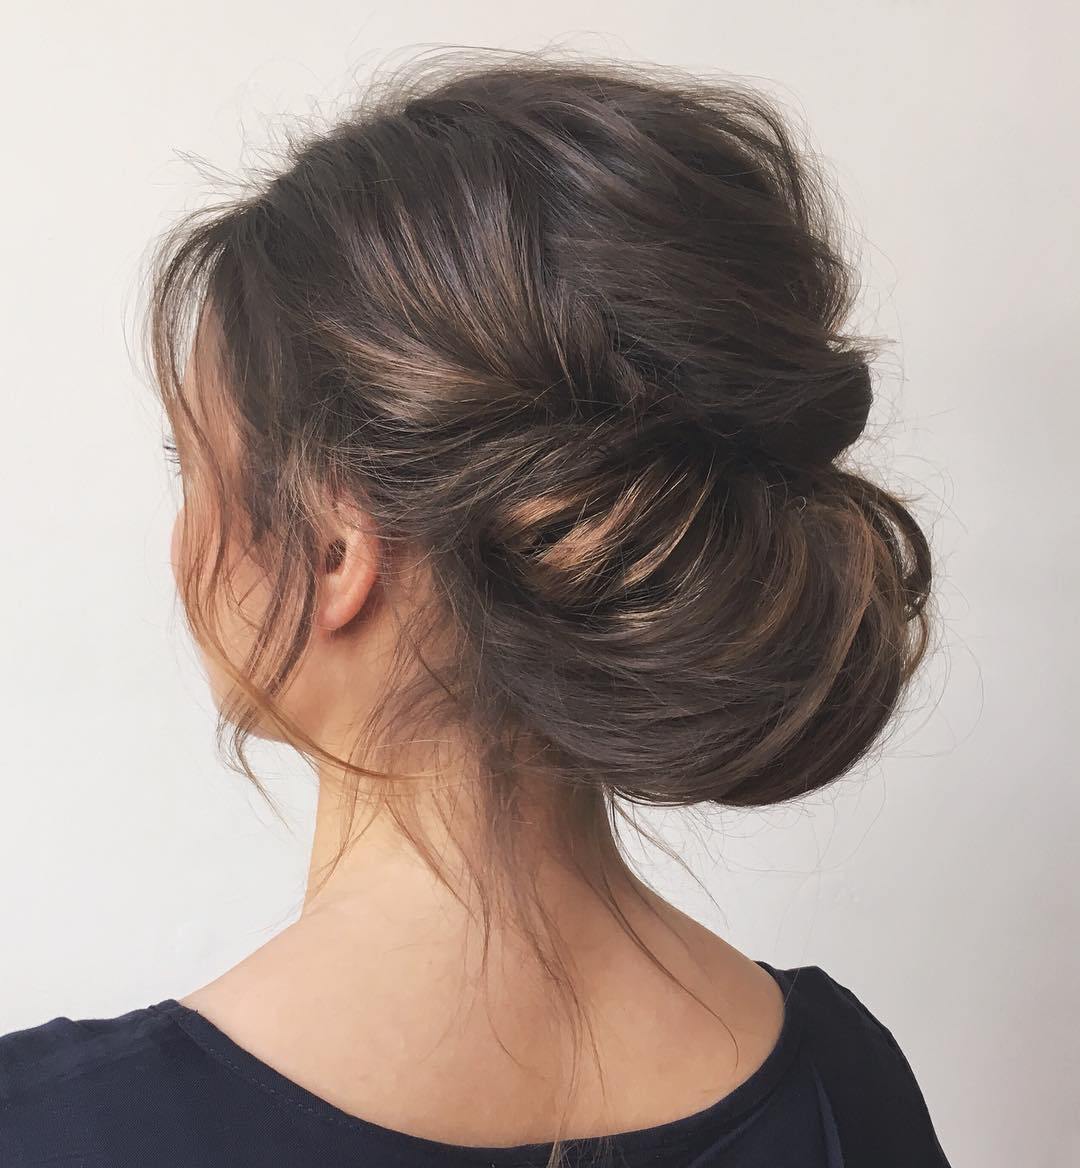 30 Picture-Perfect Updos for Long Hair Everyone Will Adore in 2022